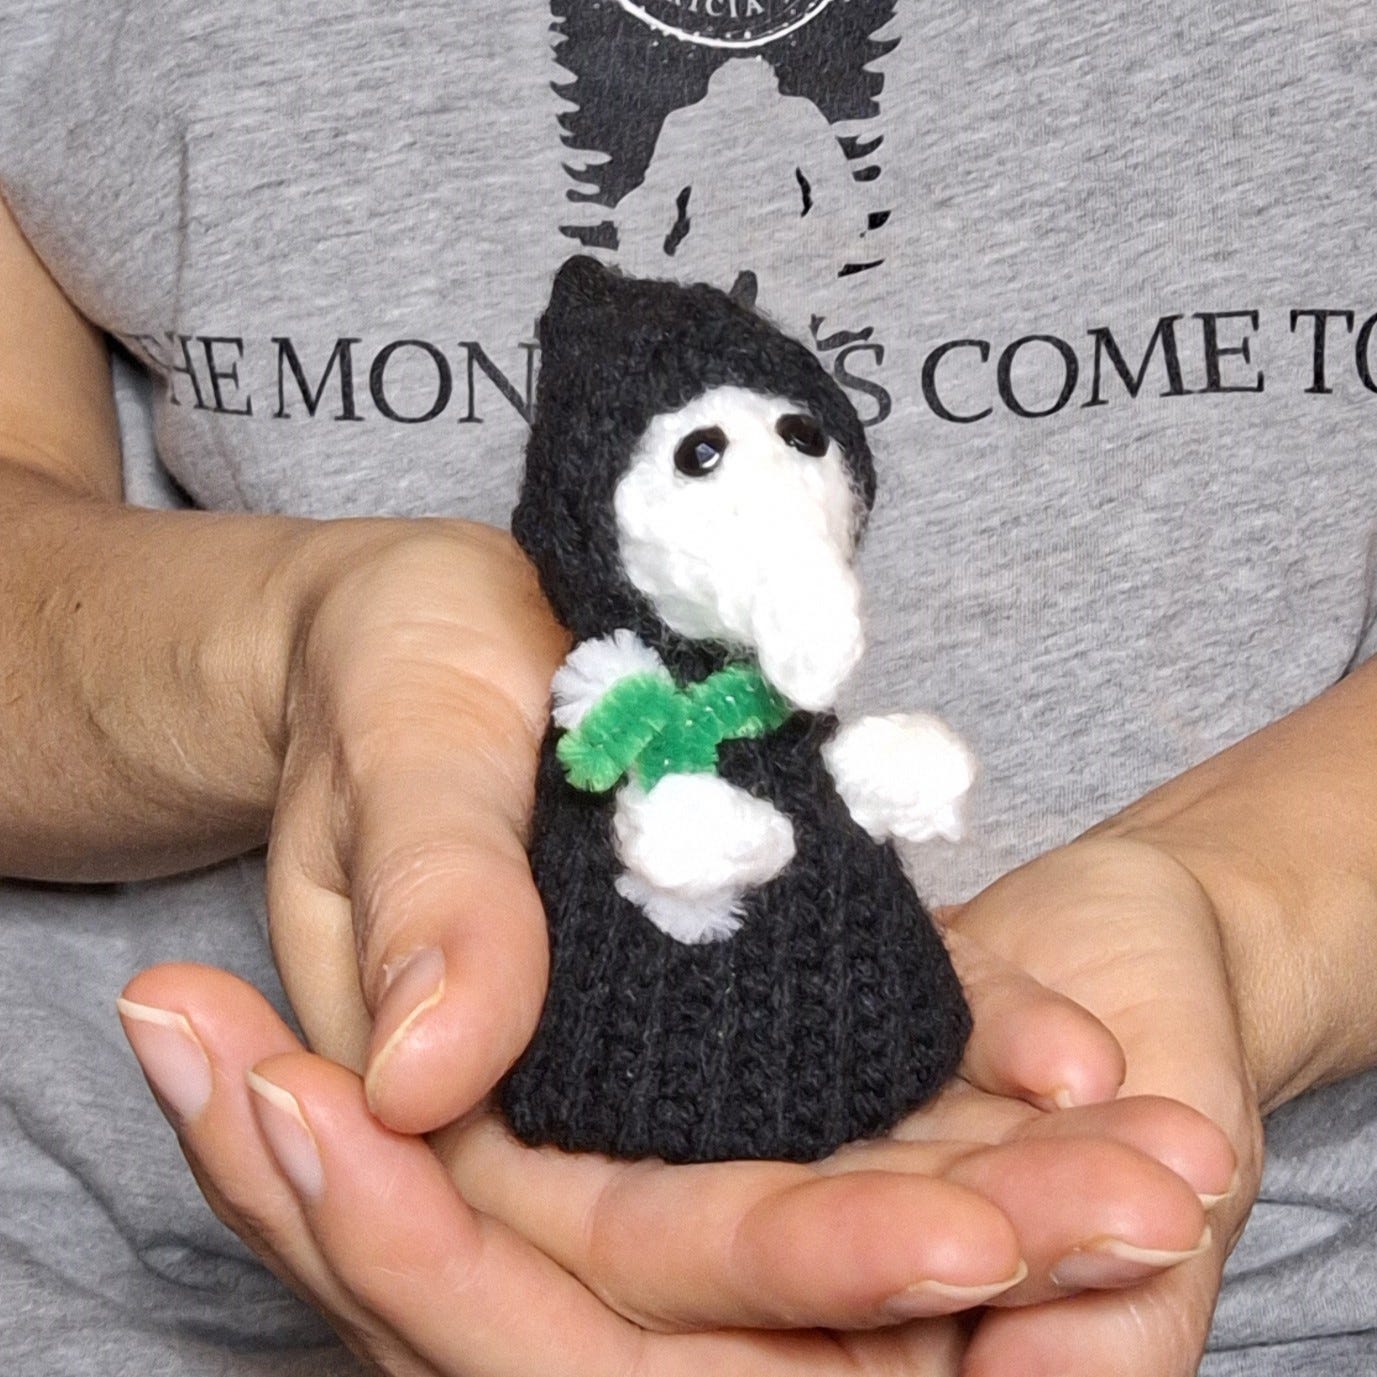 Image of a knitted plague doctor. Knitted by author Patricia J.L.